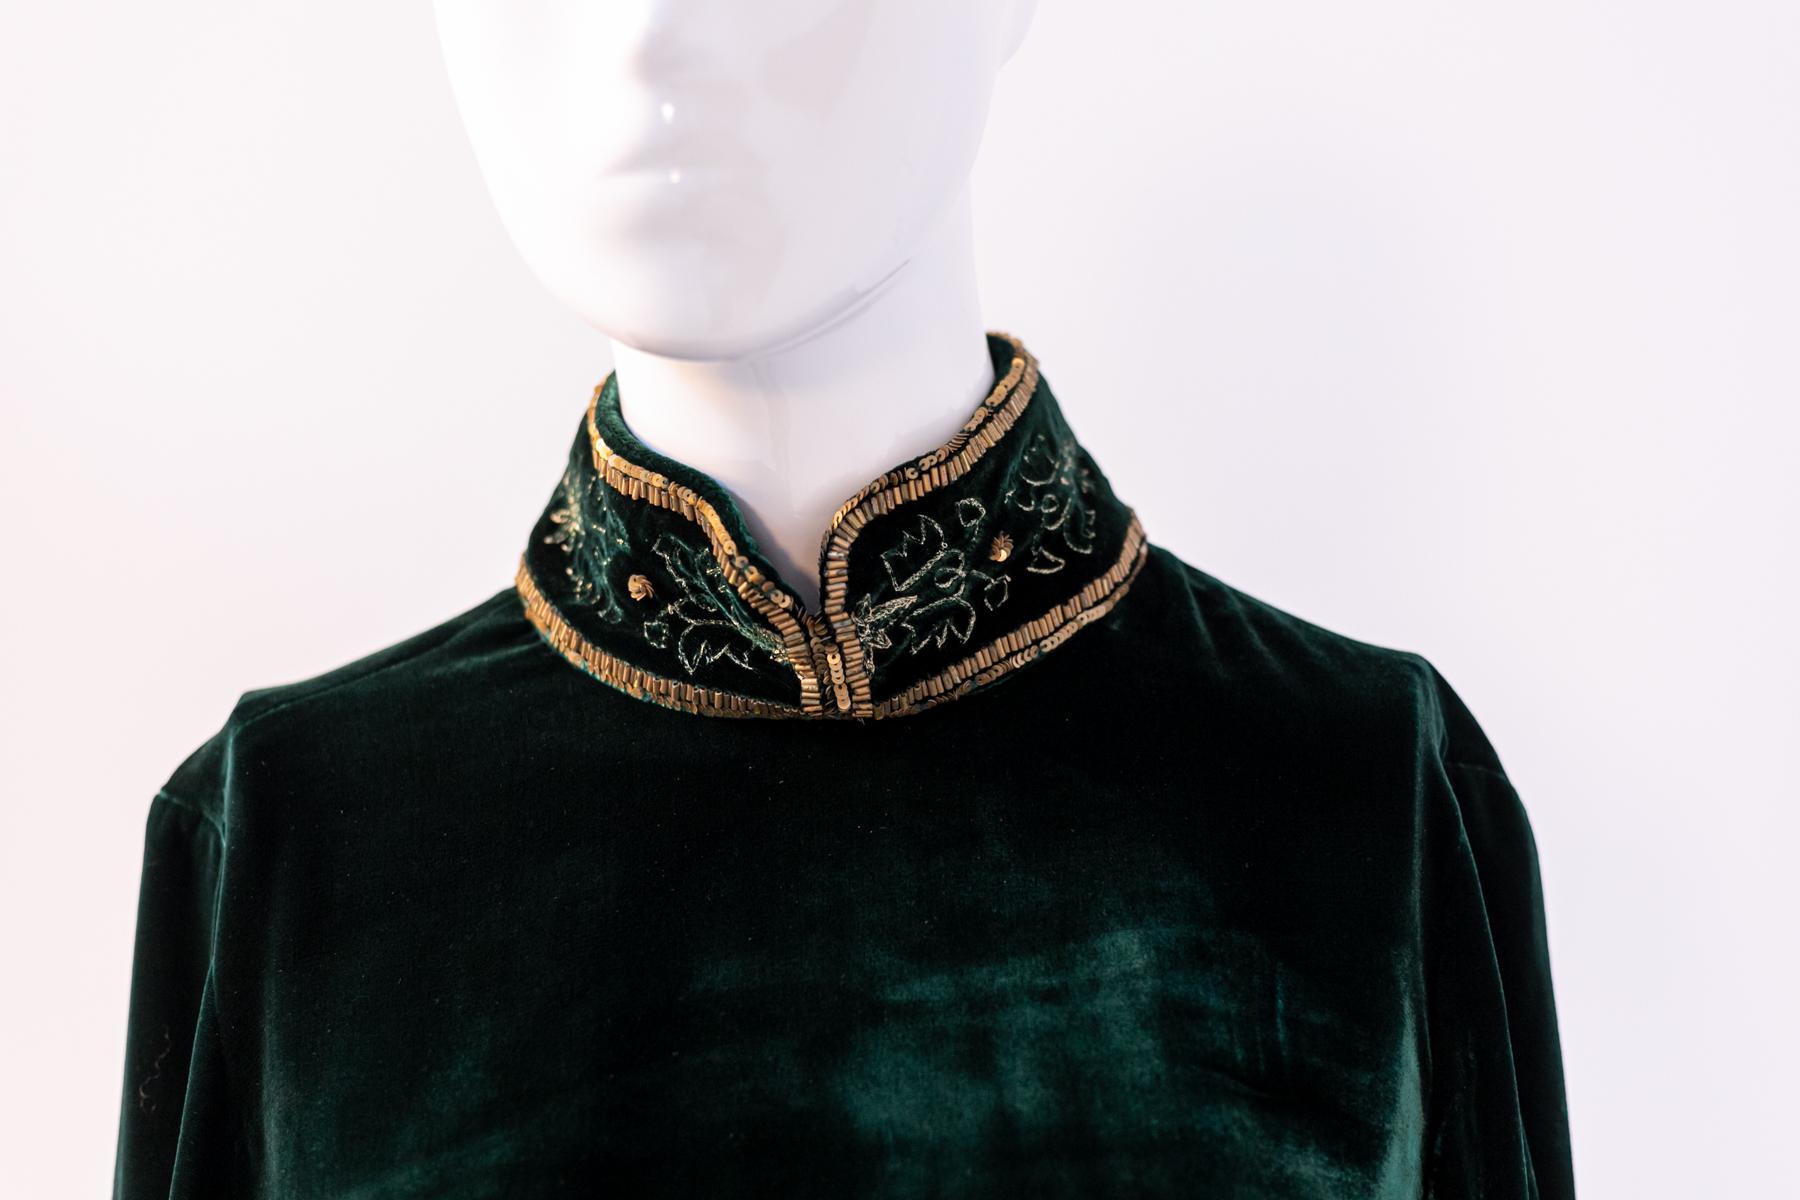 Beautiful vintage green sweater designed in the 1990s, fine Italian manufacture.
The sweater is very simple: it is made of a soft fabric that falls softly down to the hips.
The sleeves are long and soft, while the collar has a classic mandarin